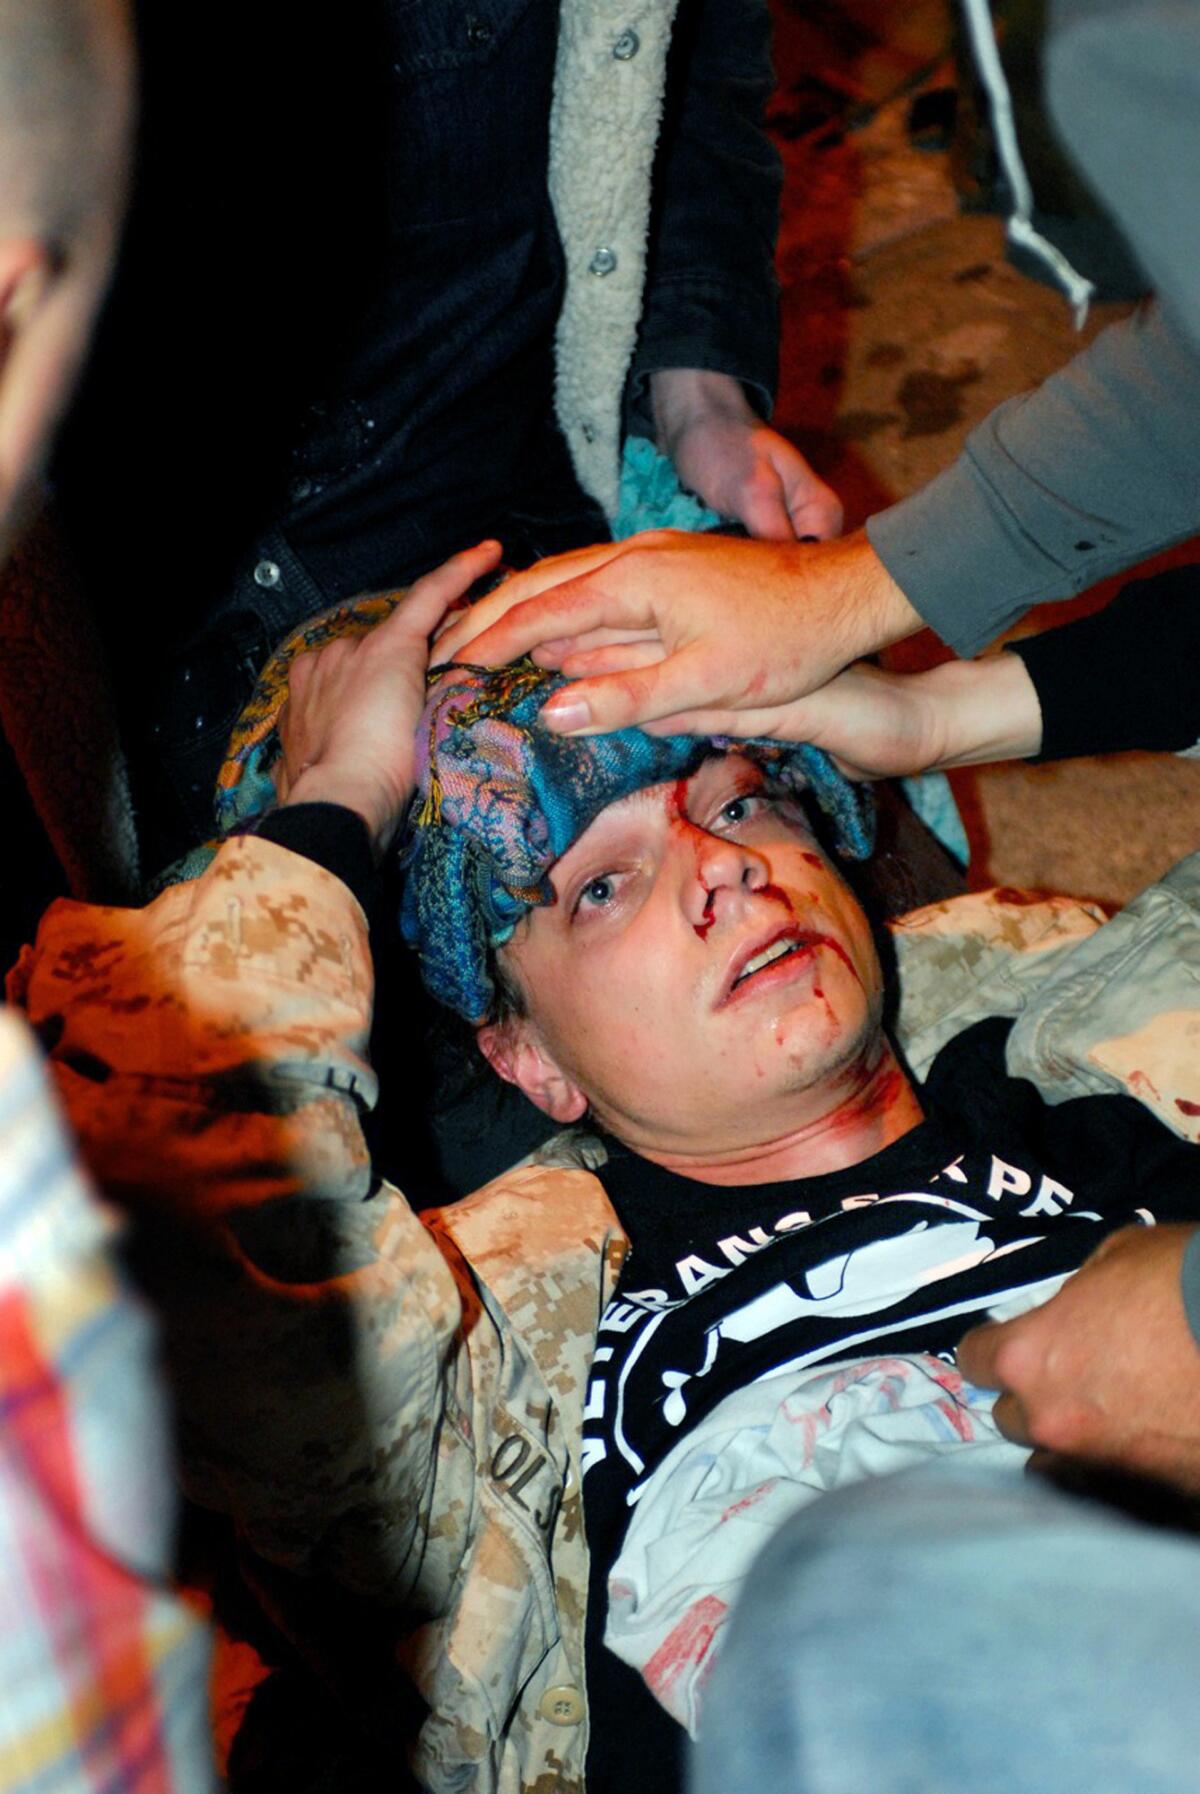 Iraq war veteran Scott Olsen lies on the ground bleeding from a head wound after being struck by a projectile during an Occupy Wall Street protest in Oakland, Calif., on Oct. 25, 2011.